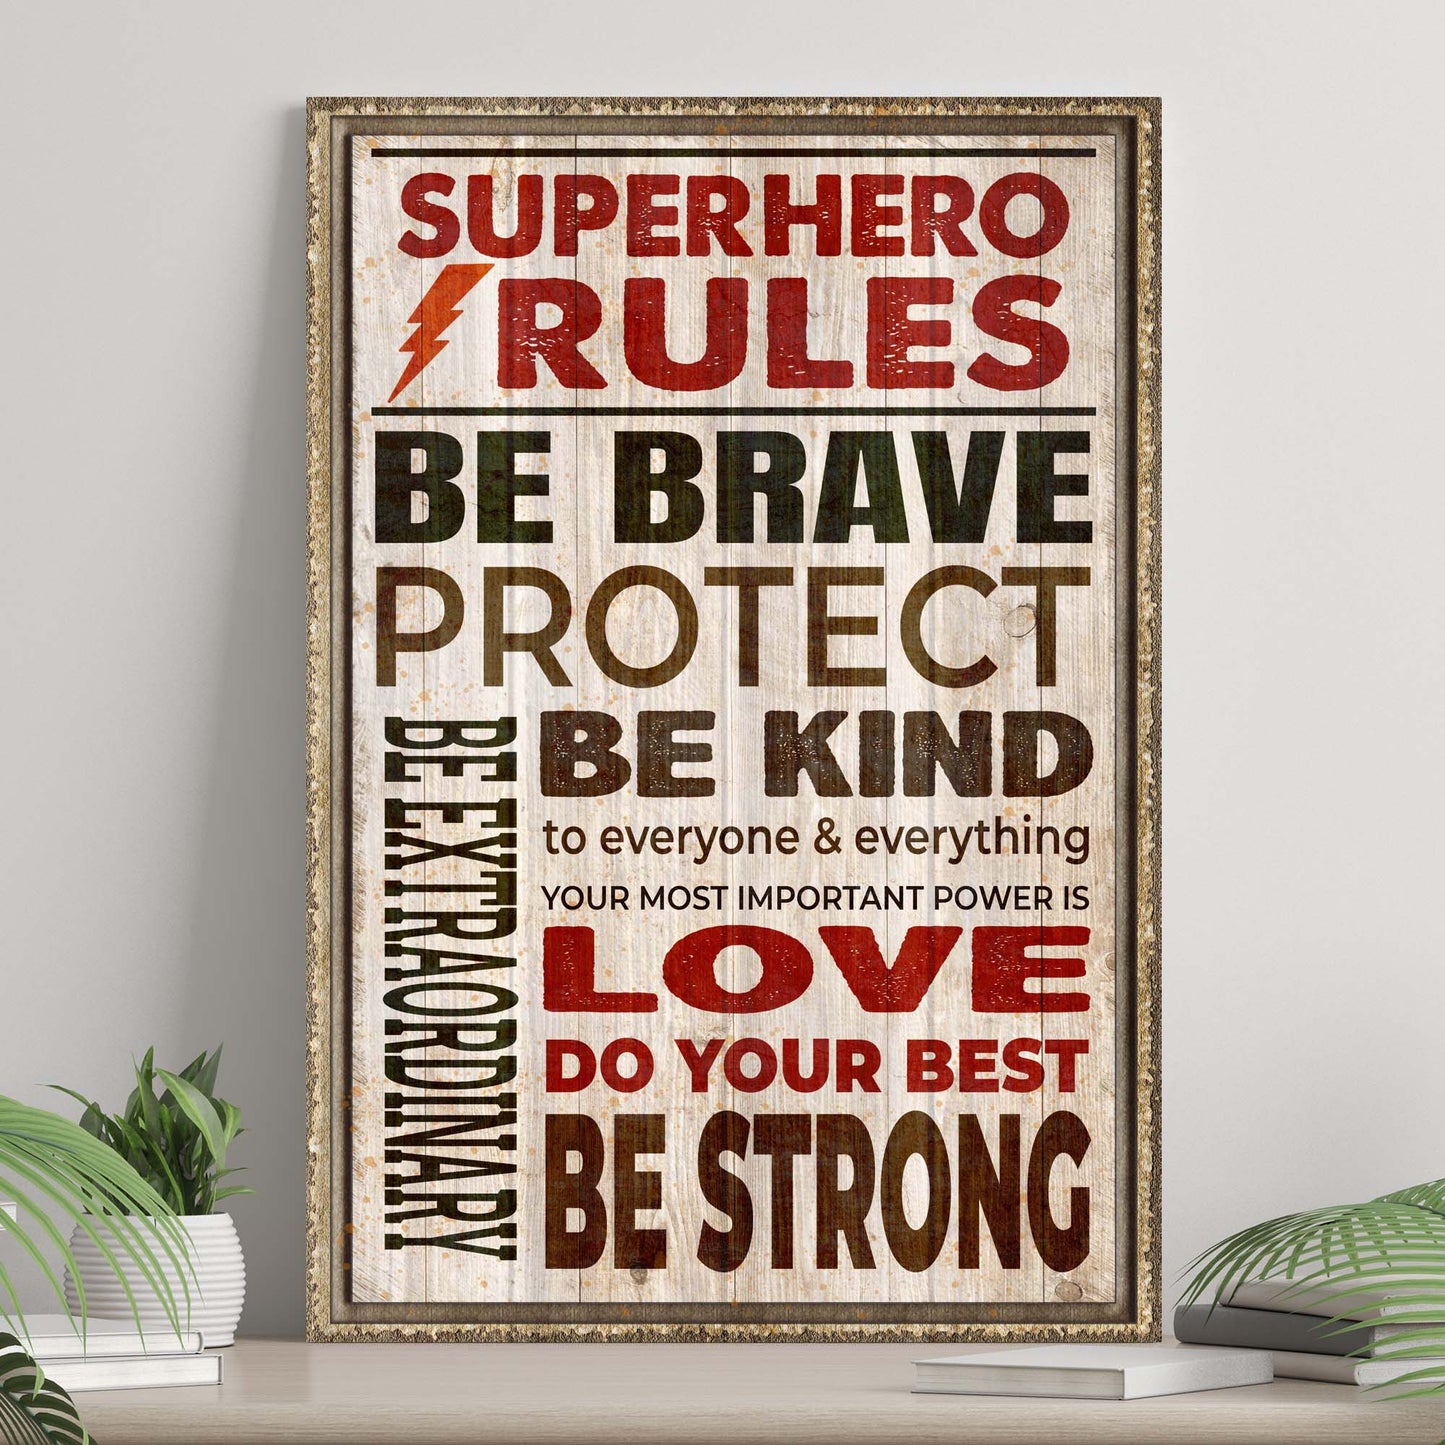 Your Most Important Power Is Love Superhero Rules Sign - Image by Tailored Canvases